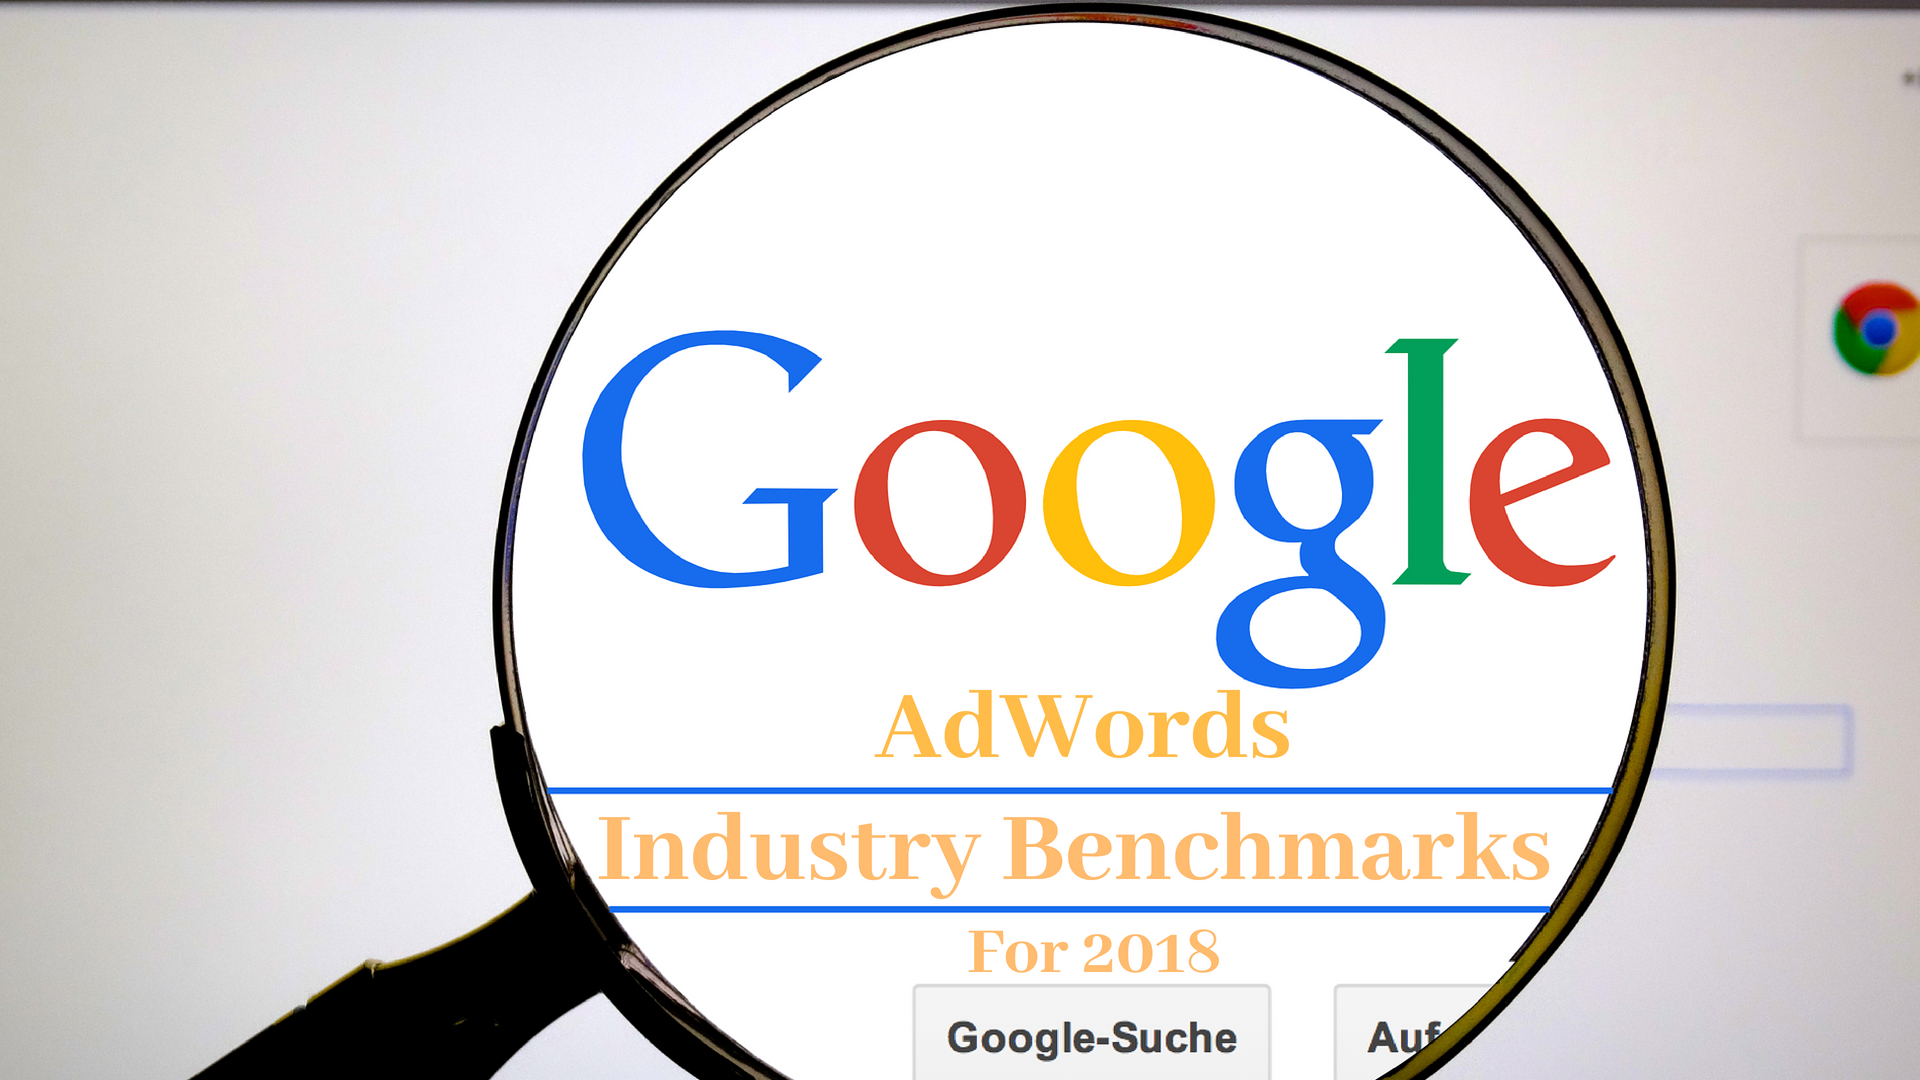 Google AdWords Industry Benchmarks 2018